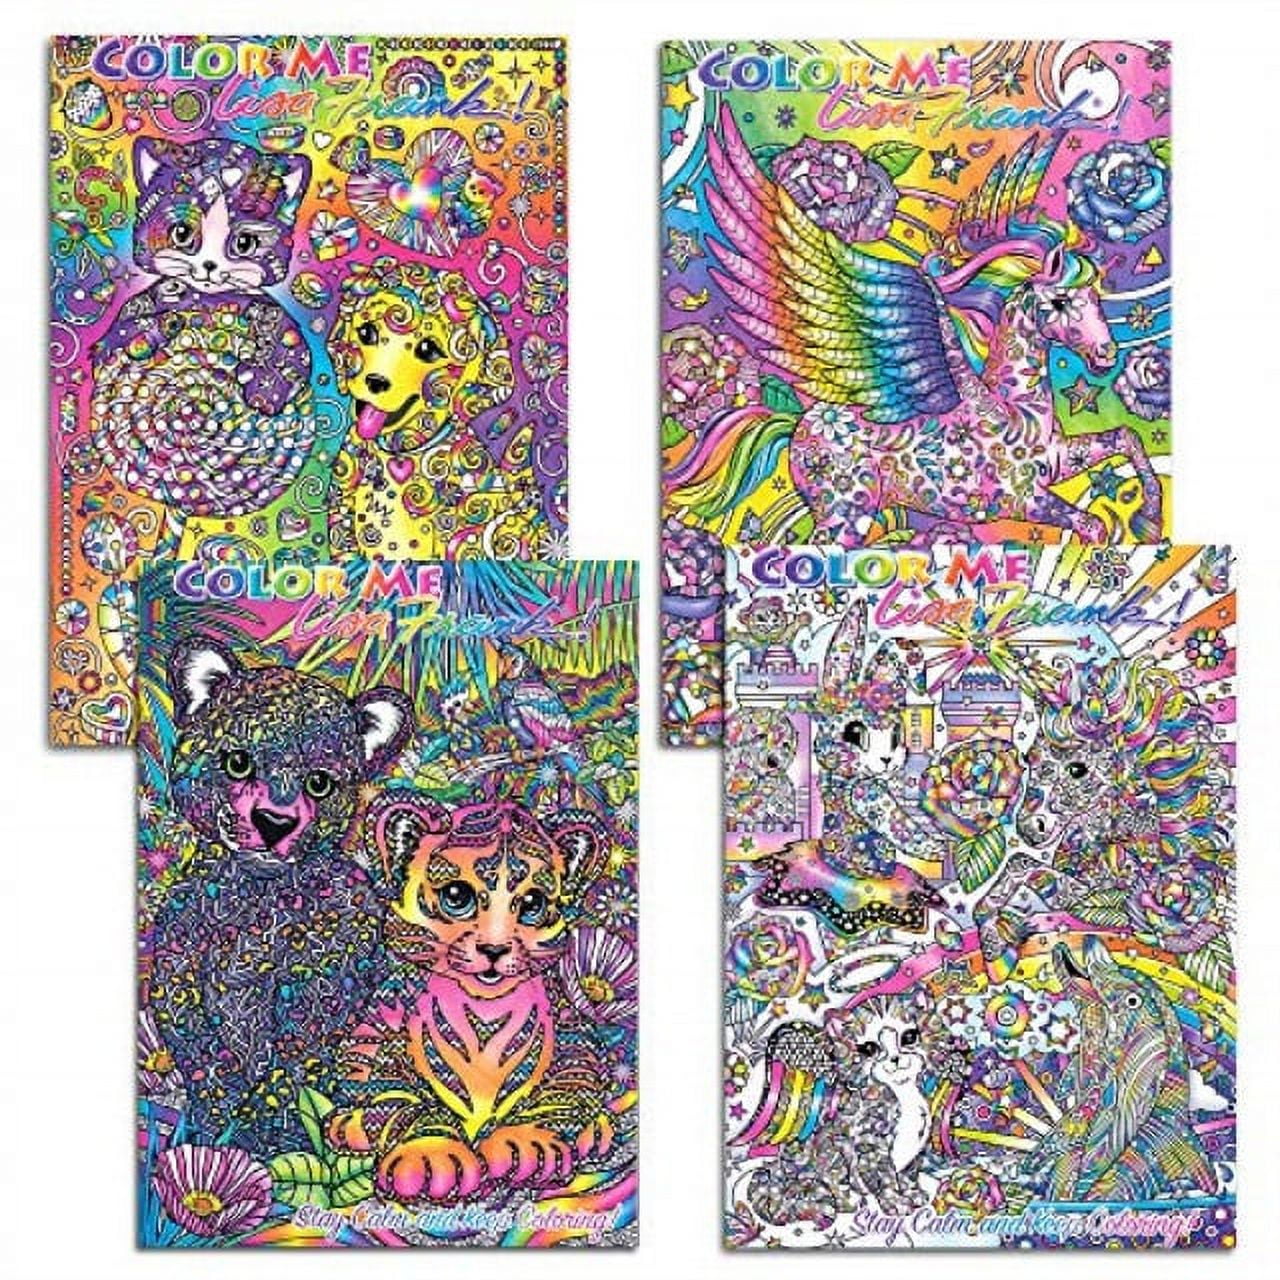 Finally found a Lisa Frank coloring book with the aliens! 👽 : r/littlespace